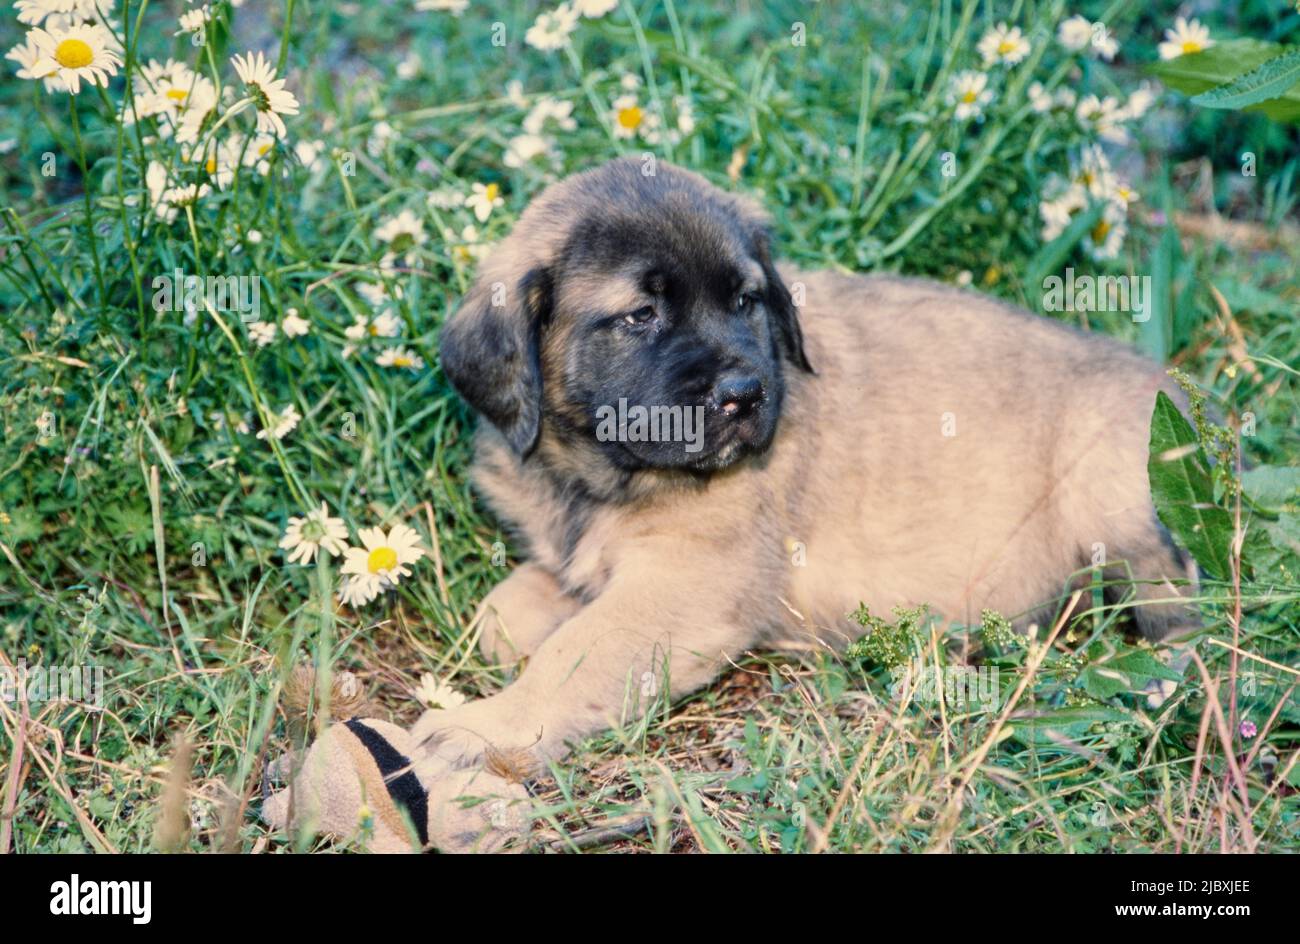 An English mastiff puppy laying in a grassy field with wildflowers Stock Photo